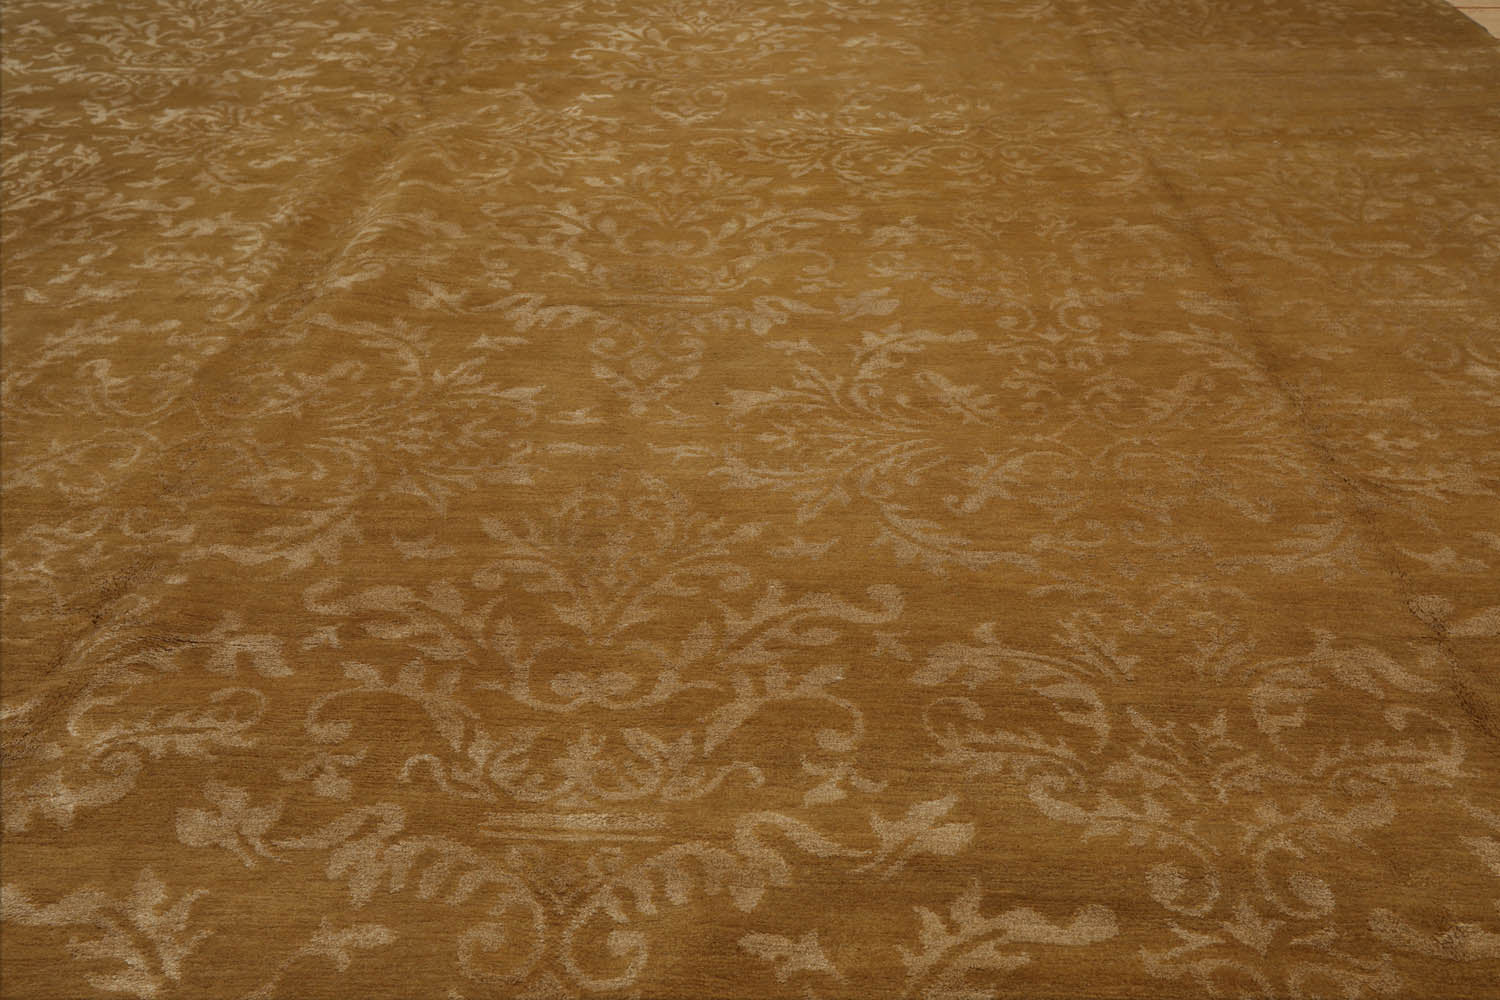 Feyza 9x12 Hand Knotted Tibetan Wool and Silk Damask Transitional Oriental Area Rug Tone On Tone, Gold Color